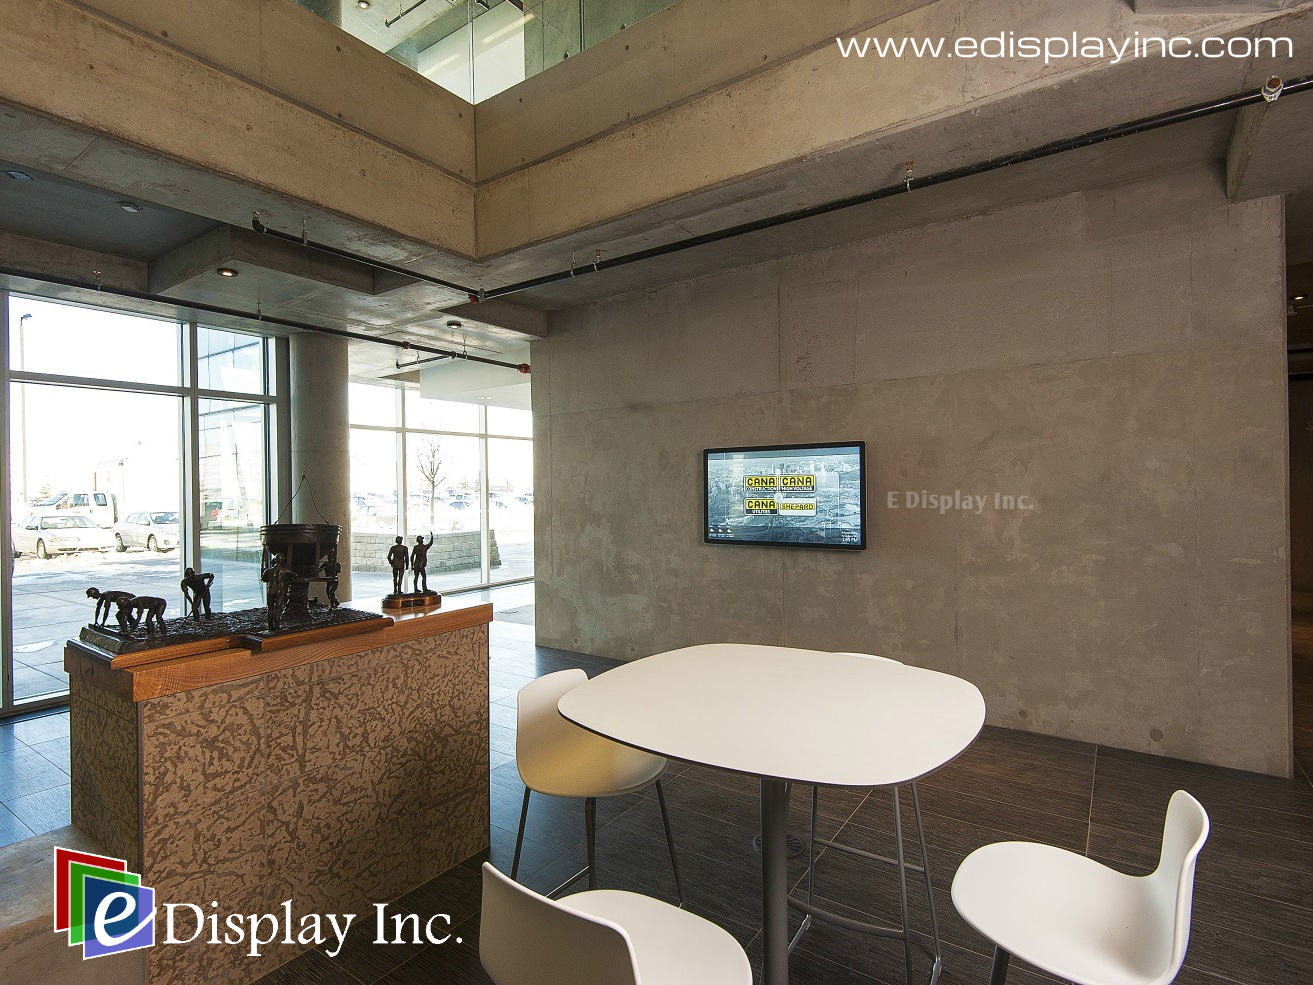 Interactive Touch Screen Solution for CANA by E Display 2